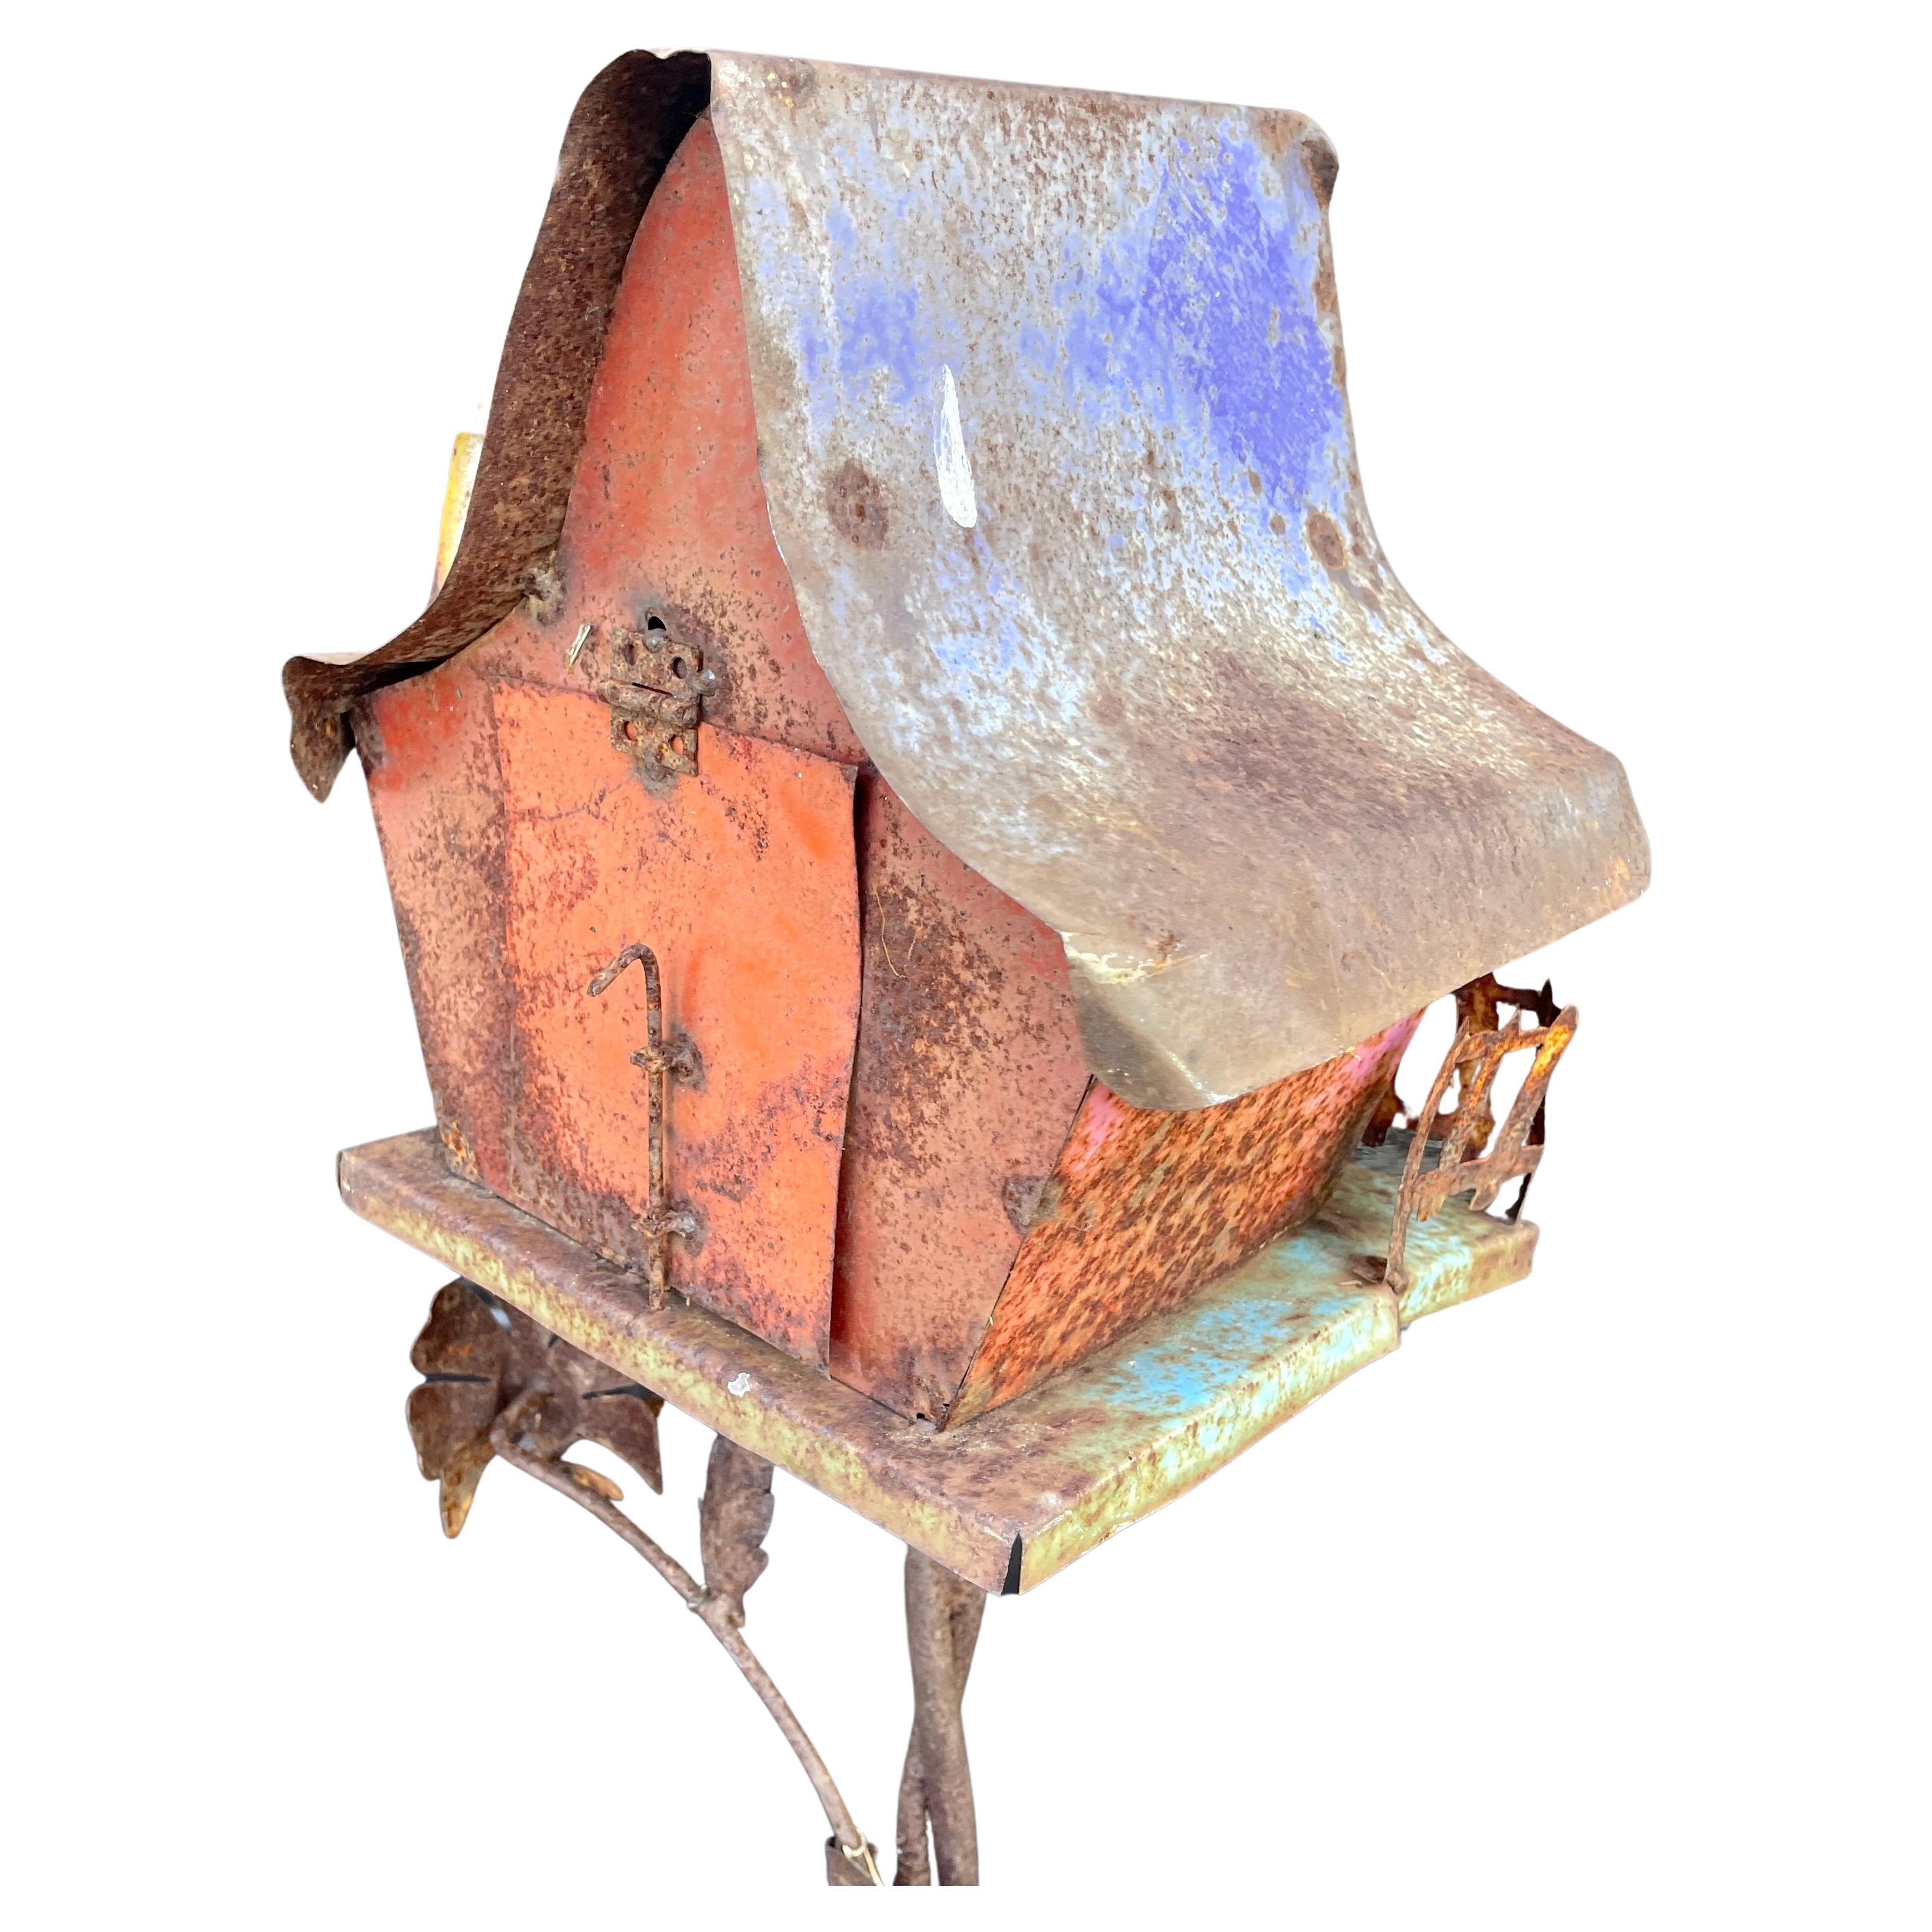 Hand-Crafted Vintage Painted Iron Bird House Feeding Stand Tripod